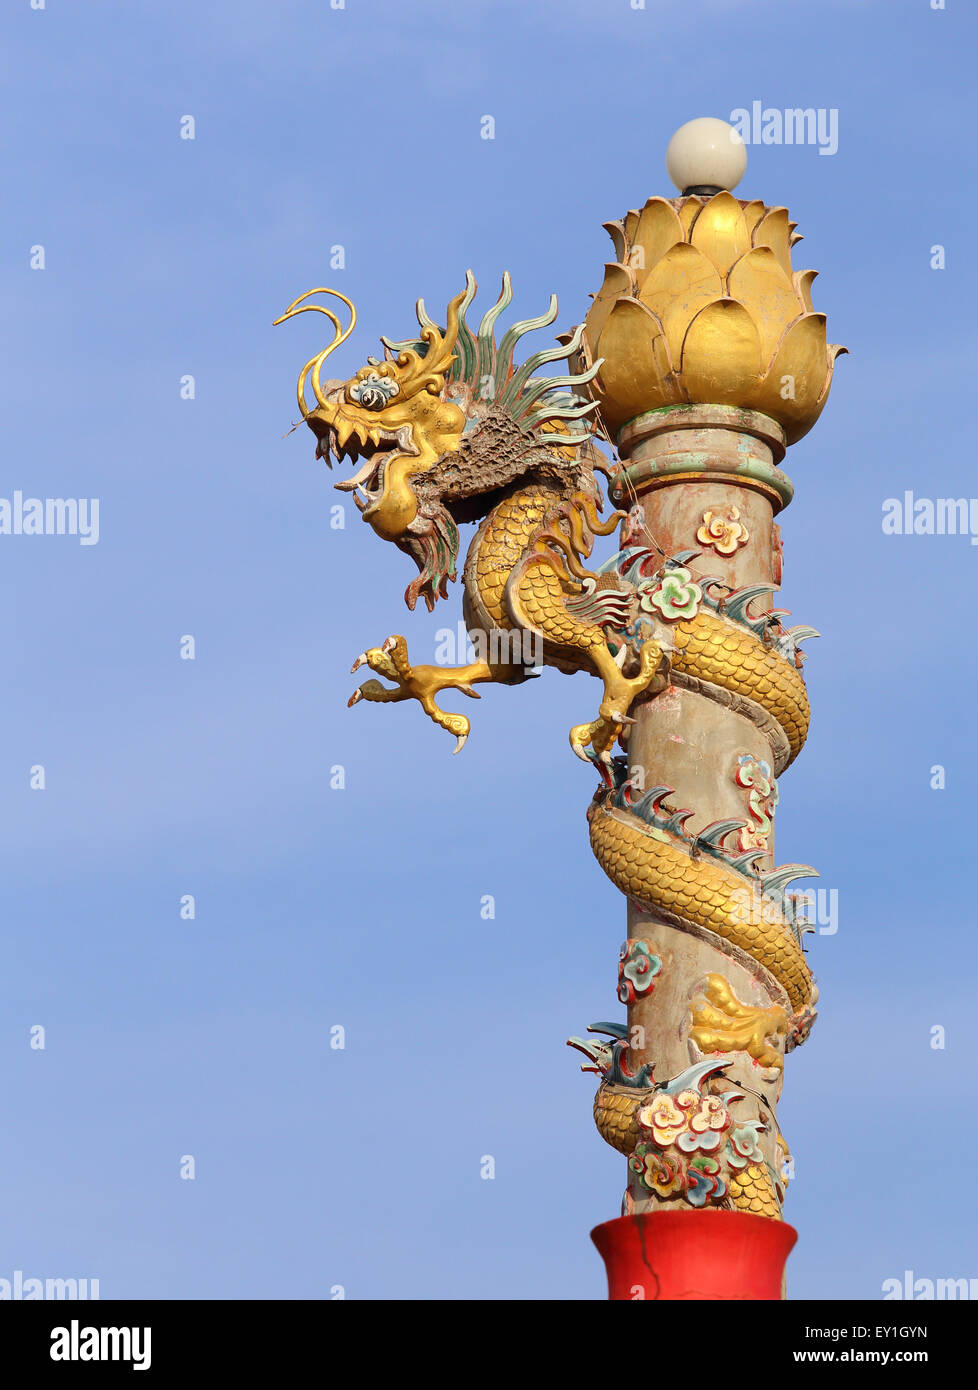 Golden dragon statue on pole with sky Stock Photo